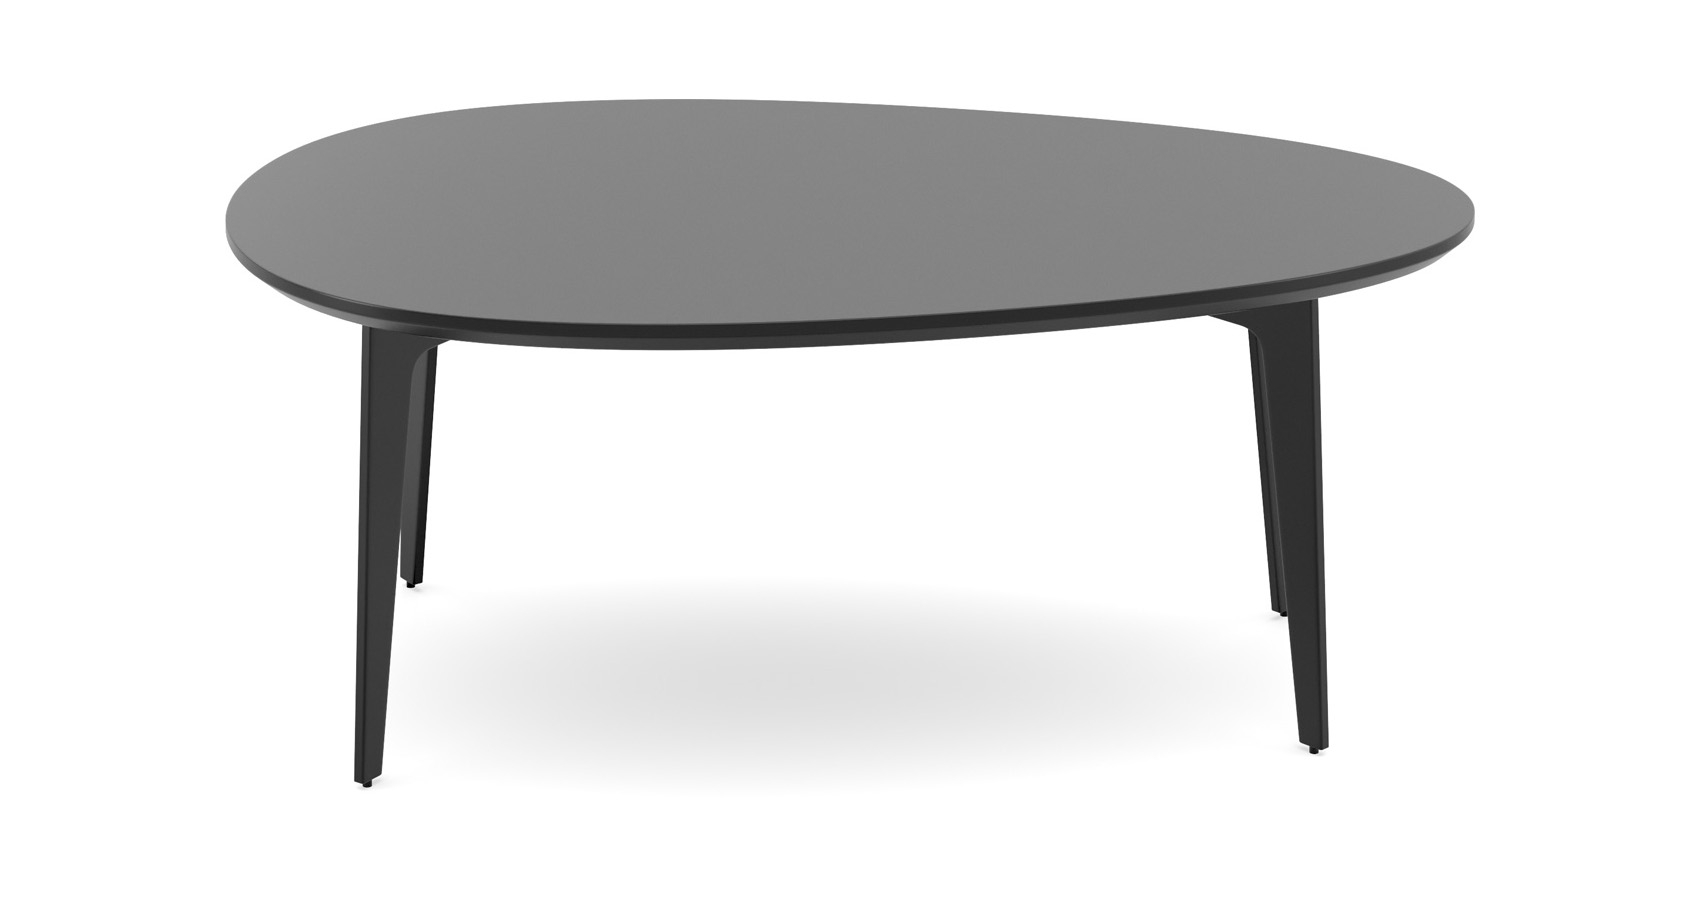 Dart Organic Coffee Table Krost Business Furniture throughout sizing 1700 X 900